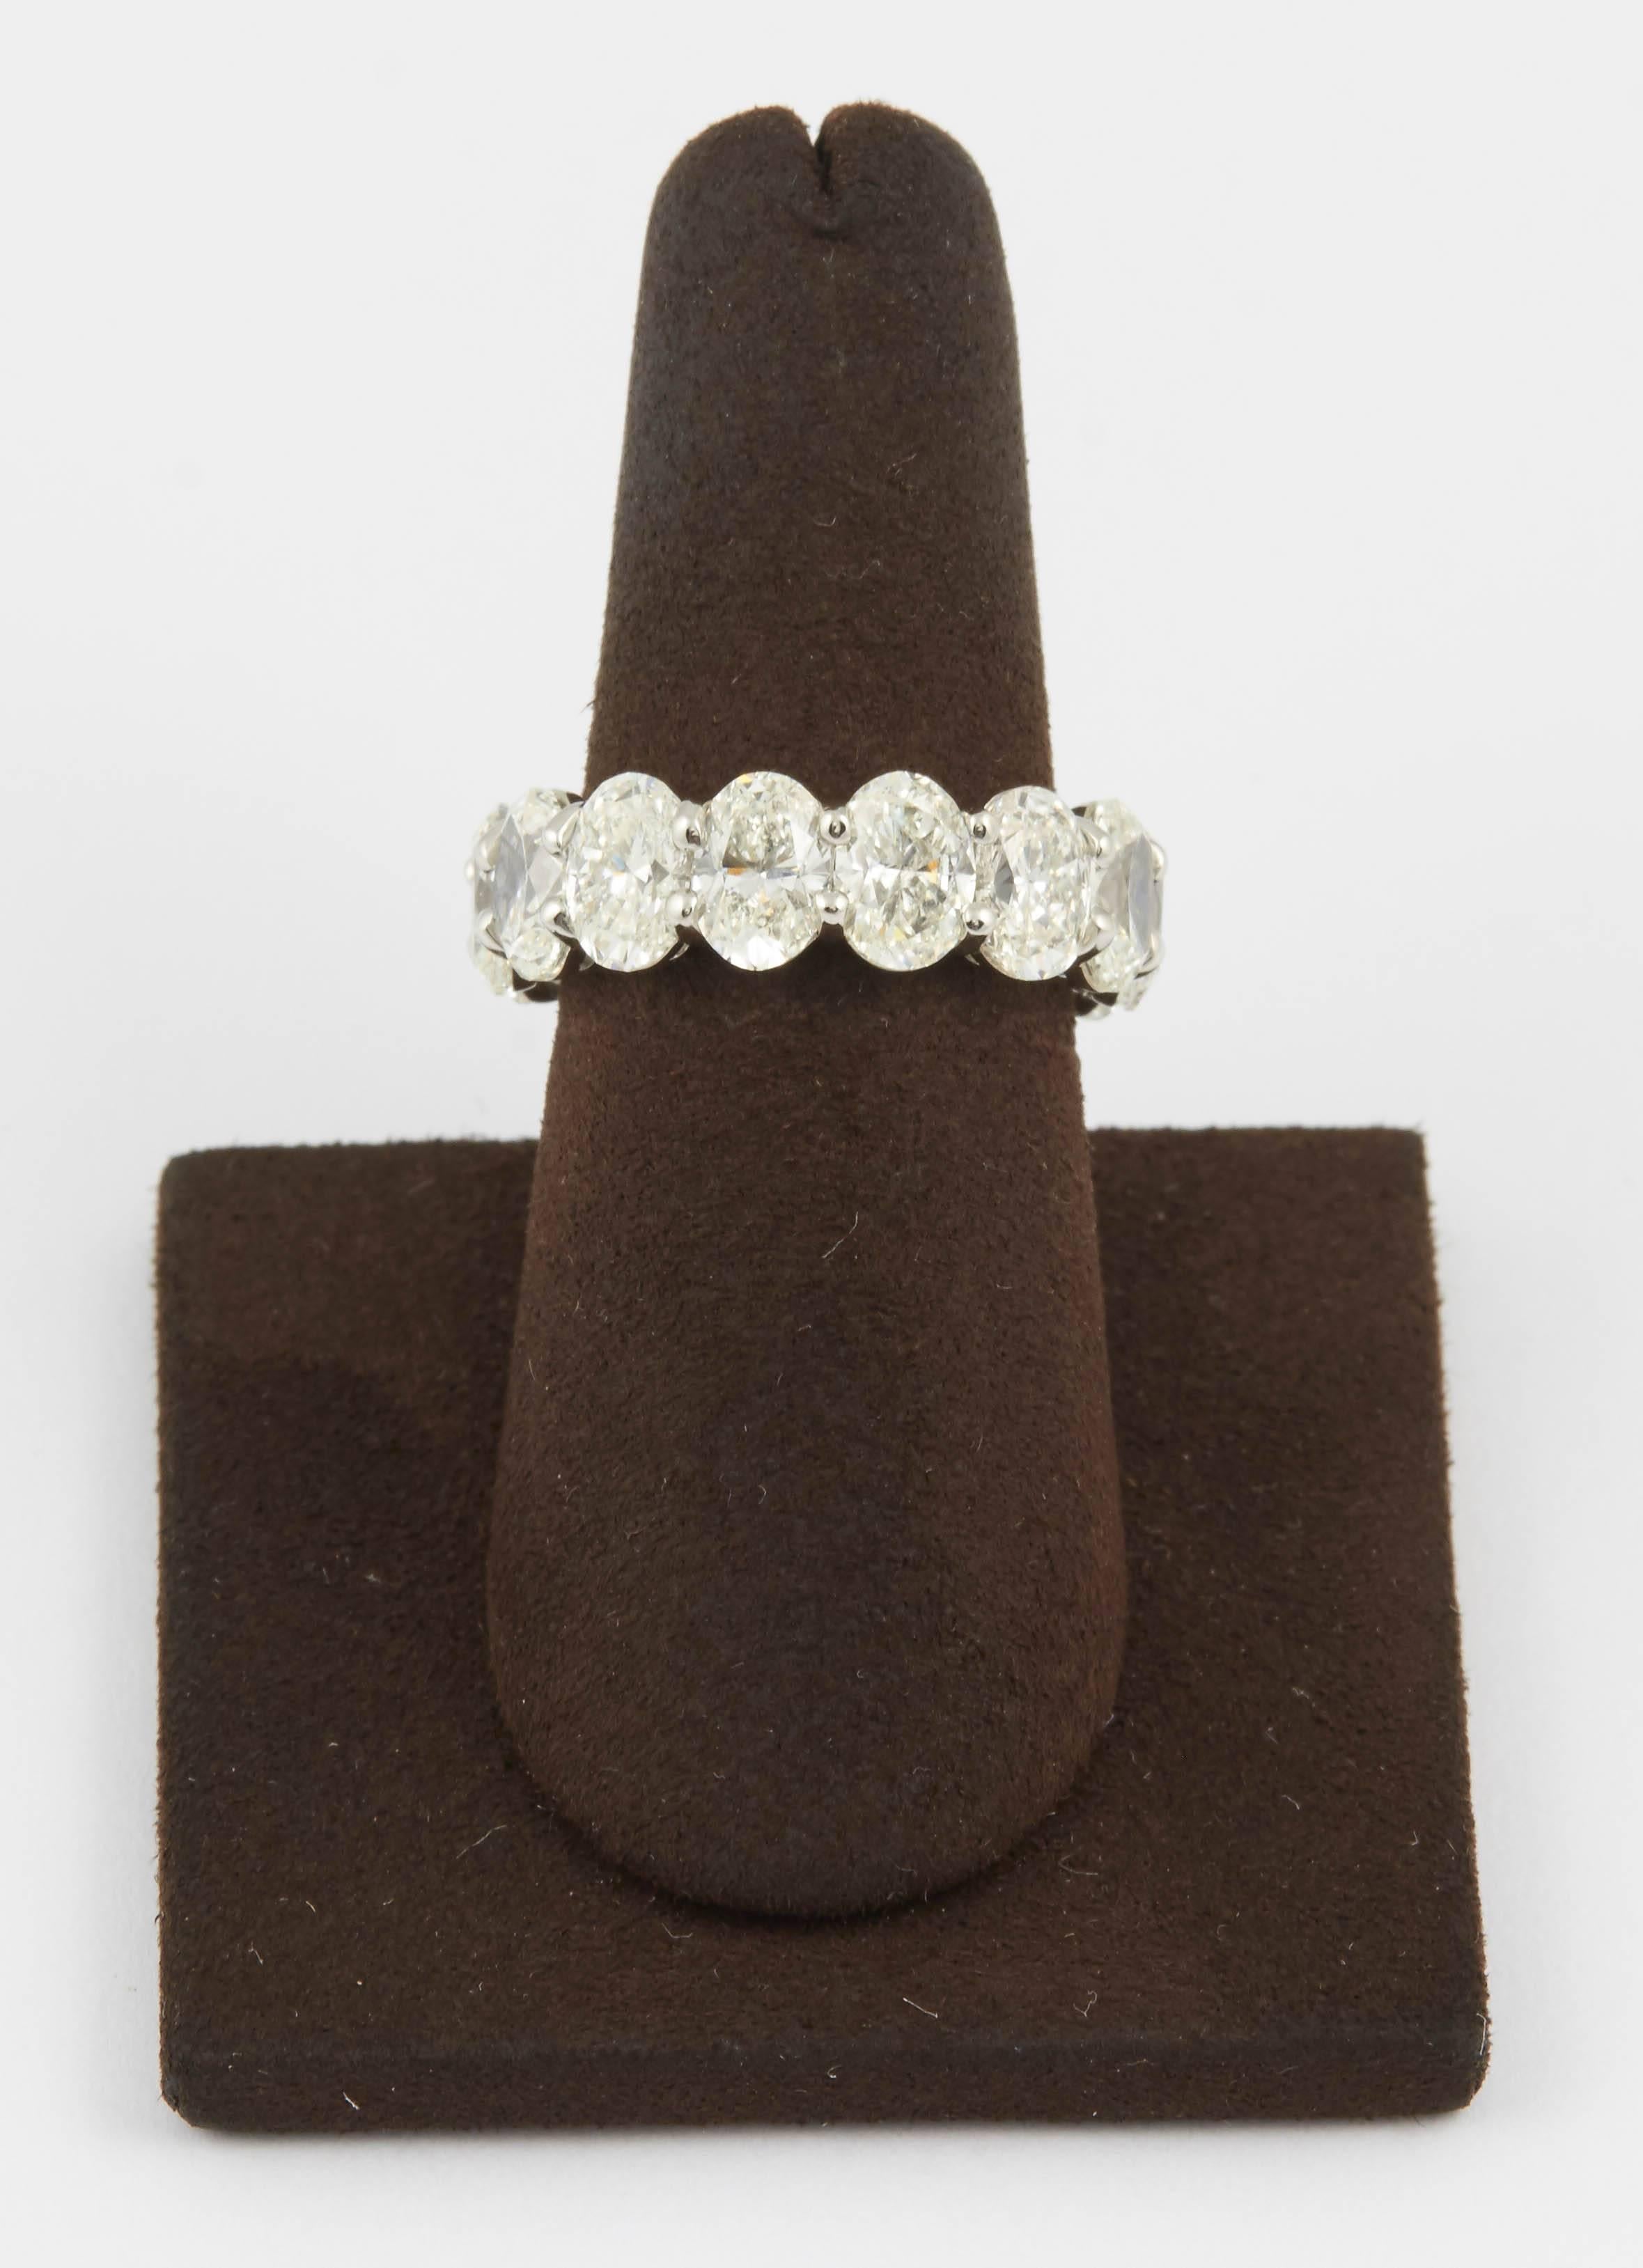 
A beautiful eternity band -- each diamond averages over 3/4 carat.

10.92 carats of white oval cut diamonds set in a custom made platinum mounting.

The finger size is 6.5, and can be adjusted.  
